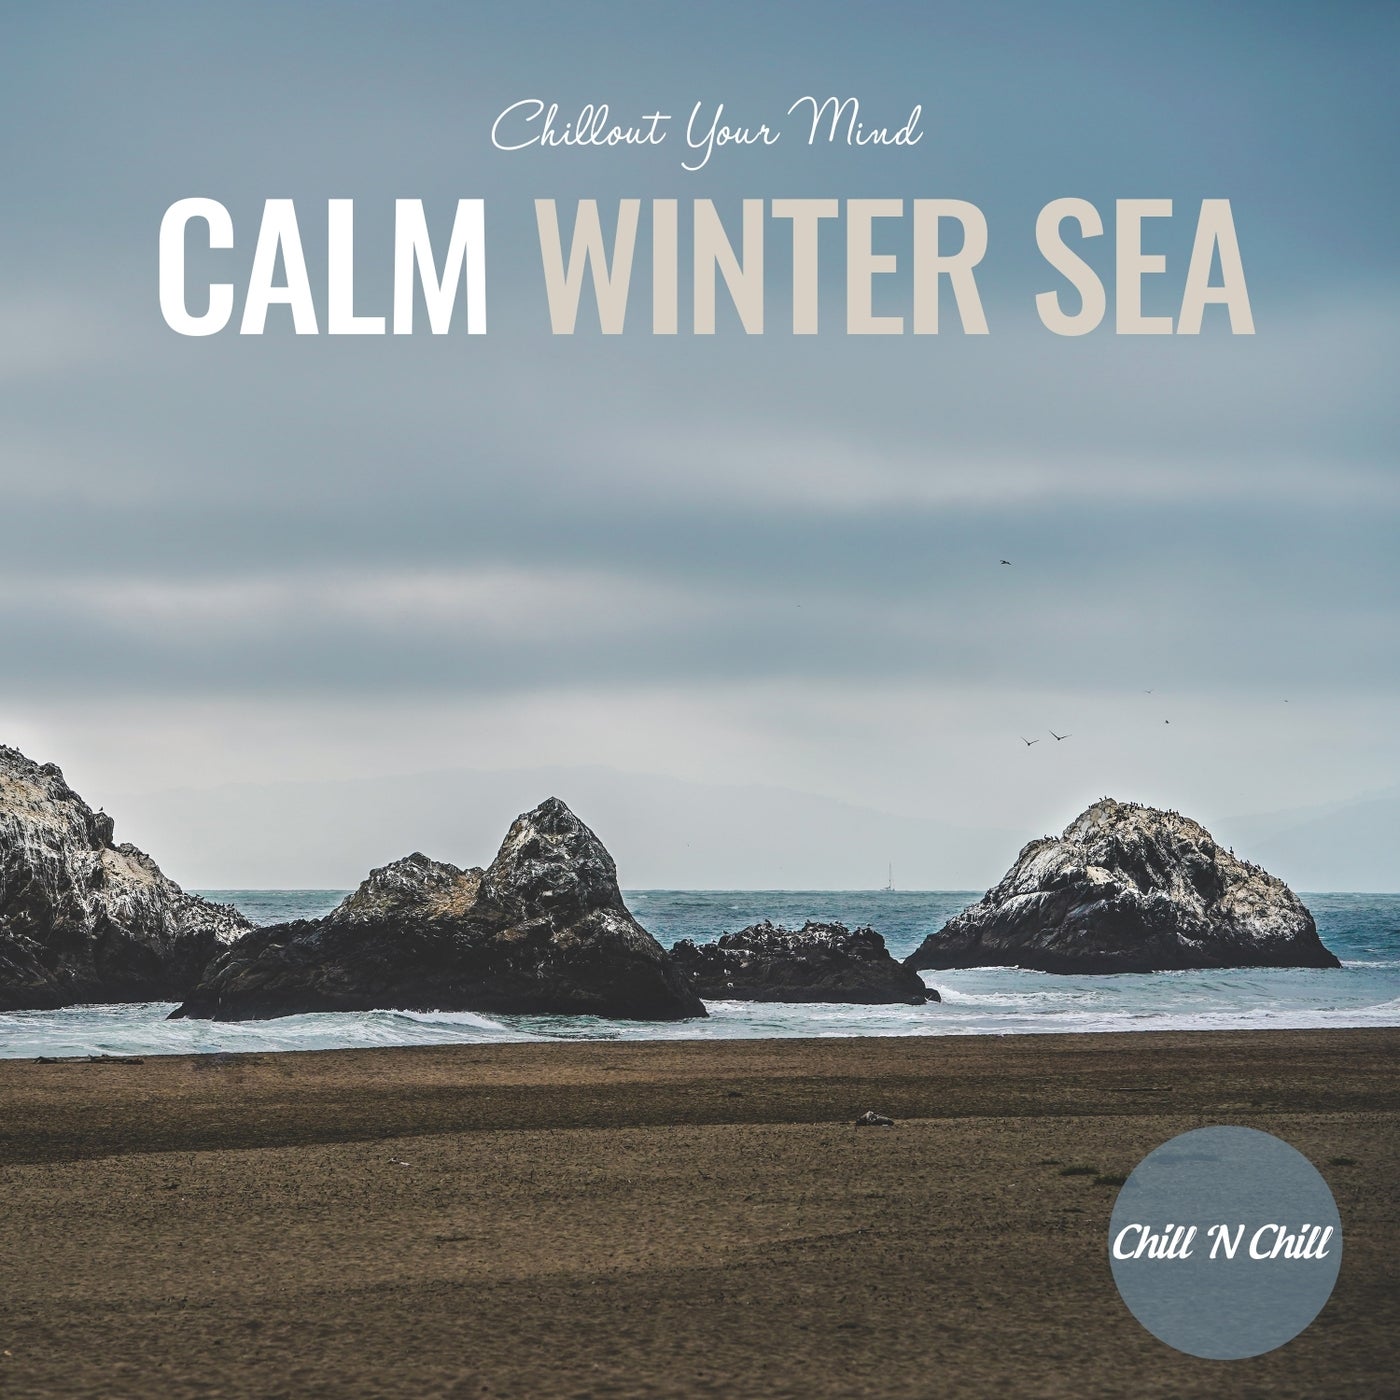 Calm Winter Sea: Chillout Your Mind